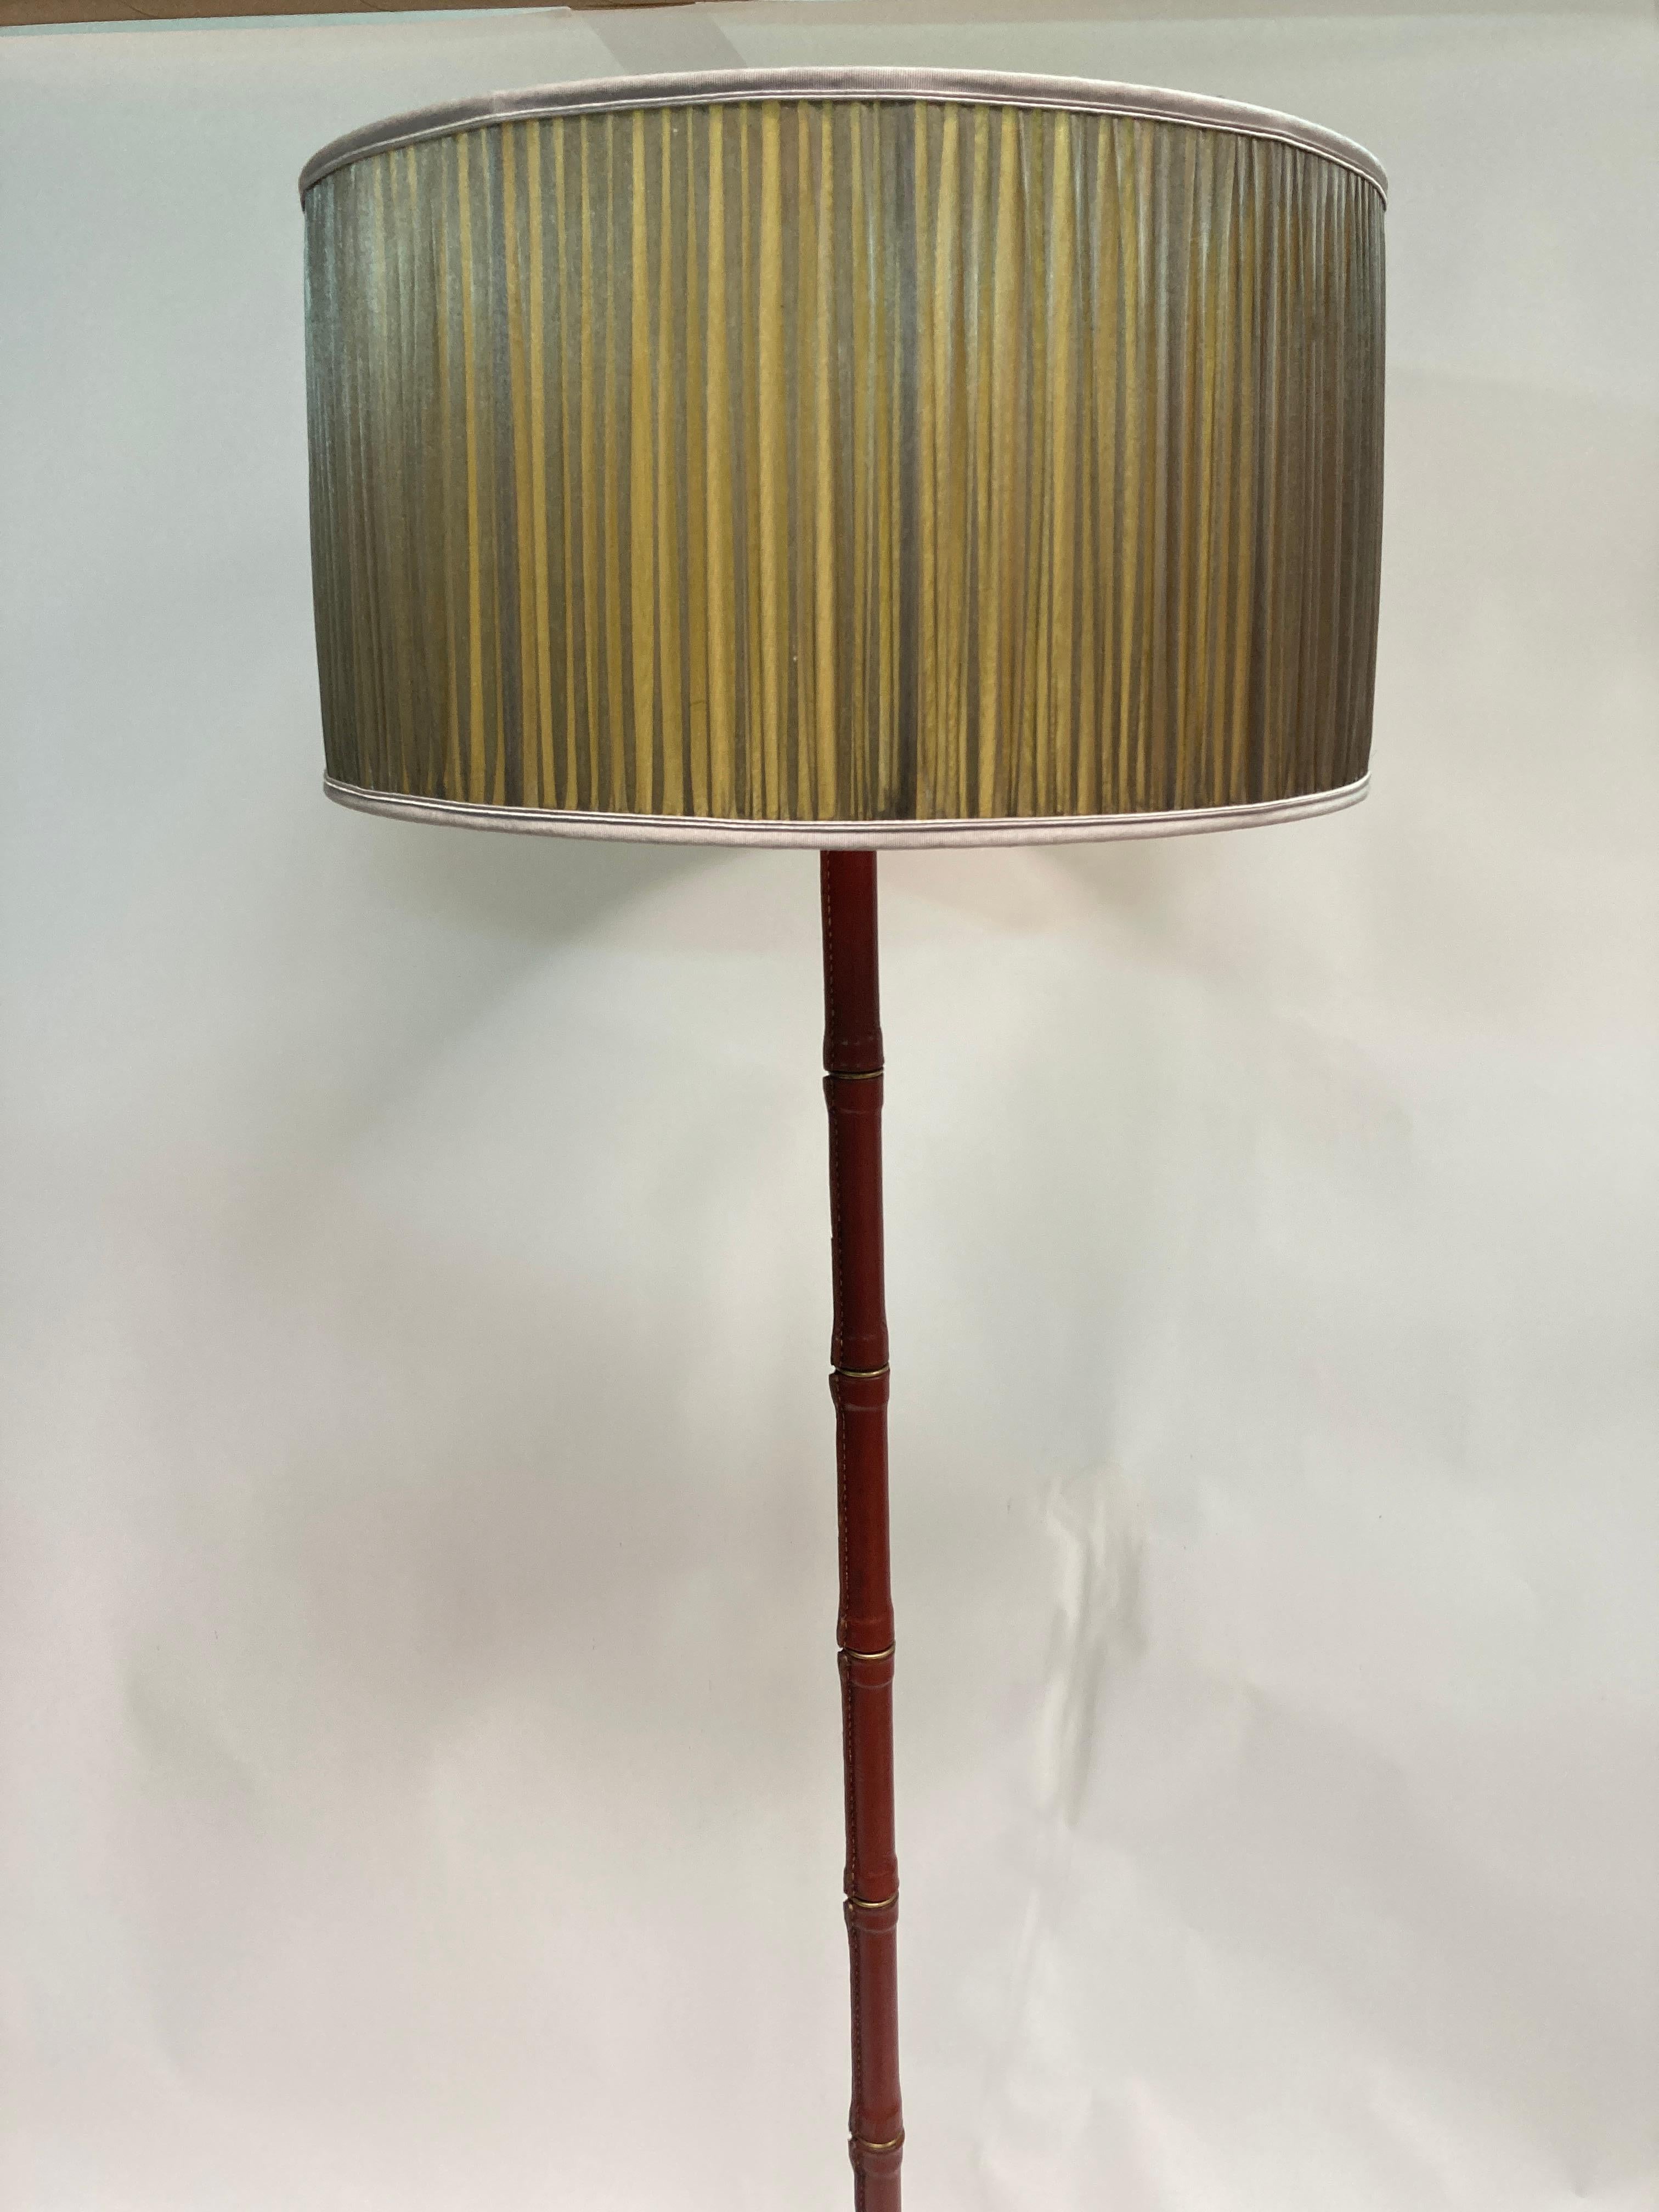 Rare 1950's Stitched leather floor lamp by Jacques Adnet 
All covered with brown leather  with brass part on feet
Great vintage condition